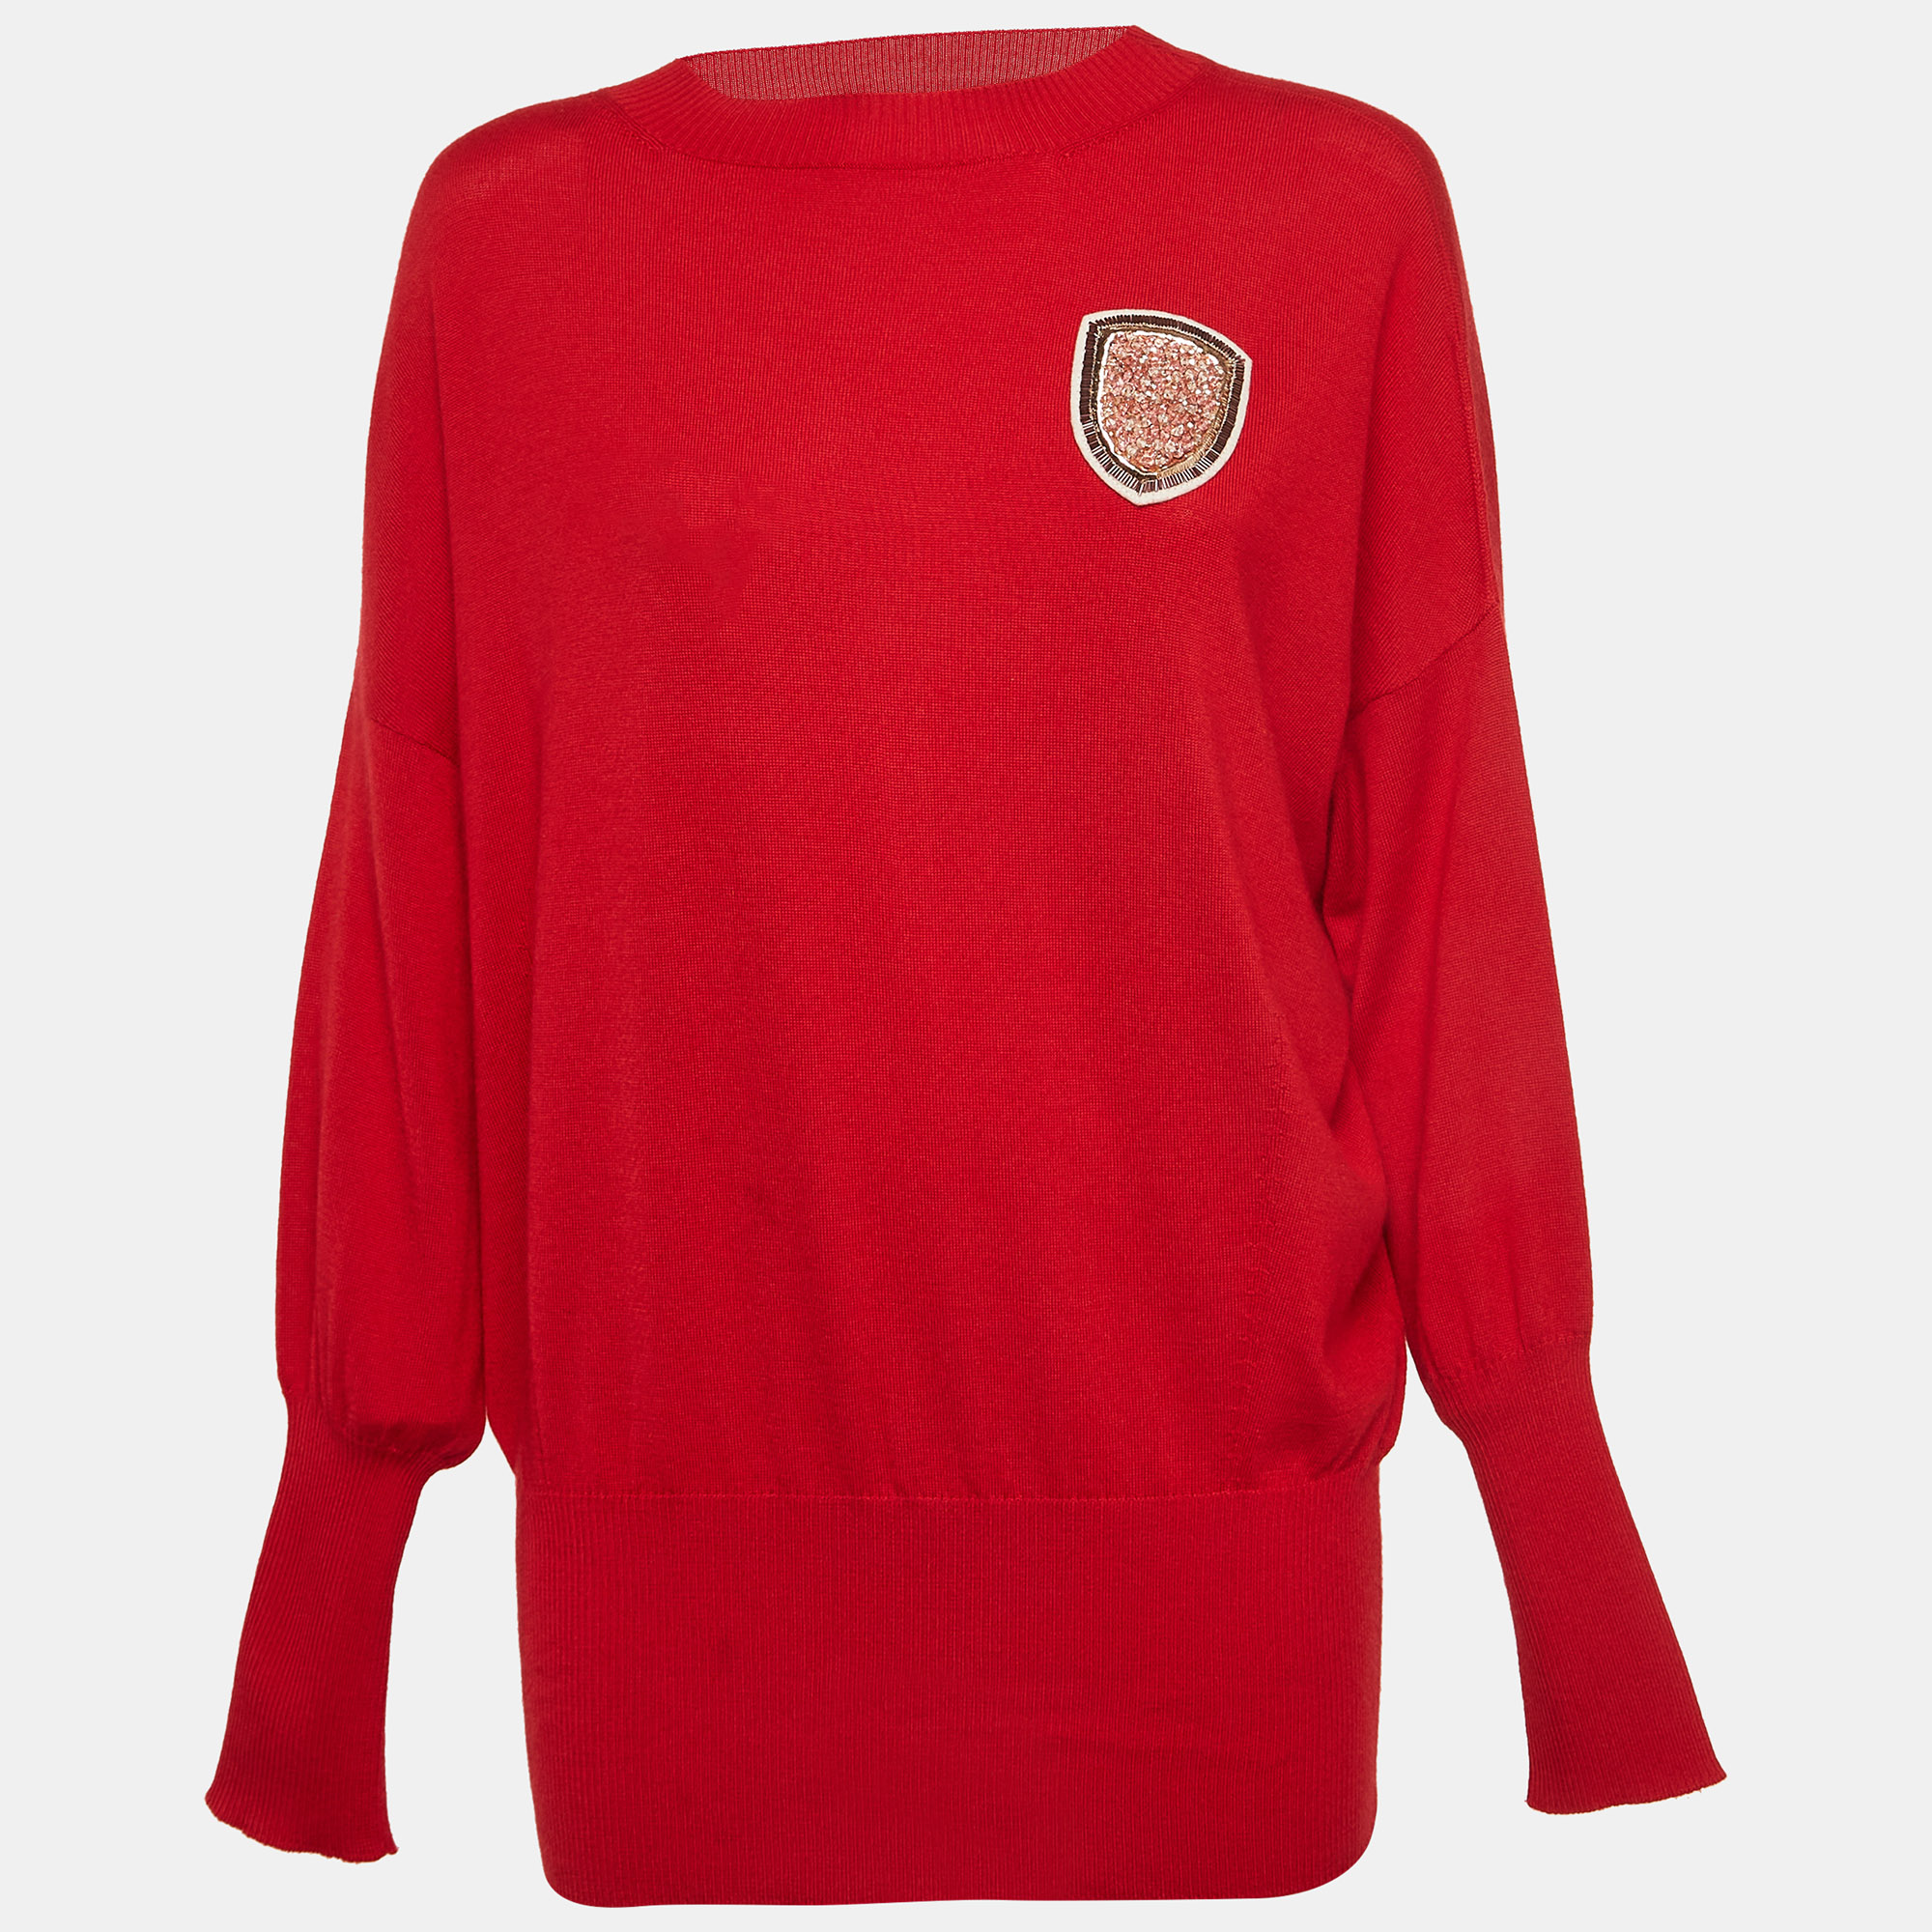 

Dior Red Wool and Cashmere Crystal Applique Knit Crew Neck Jumper